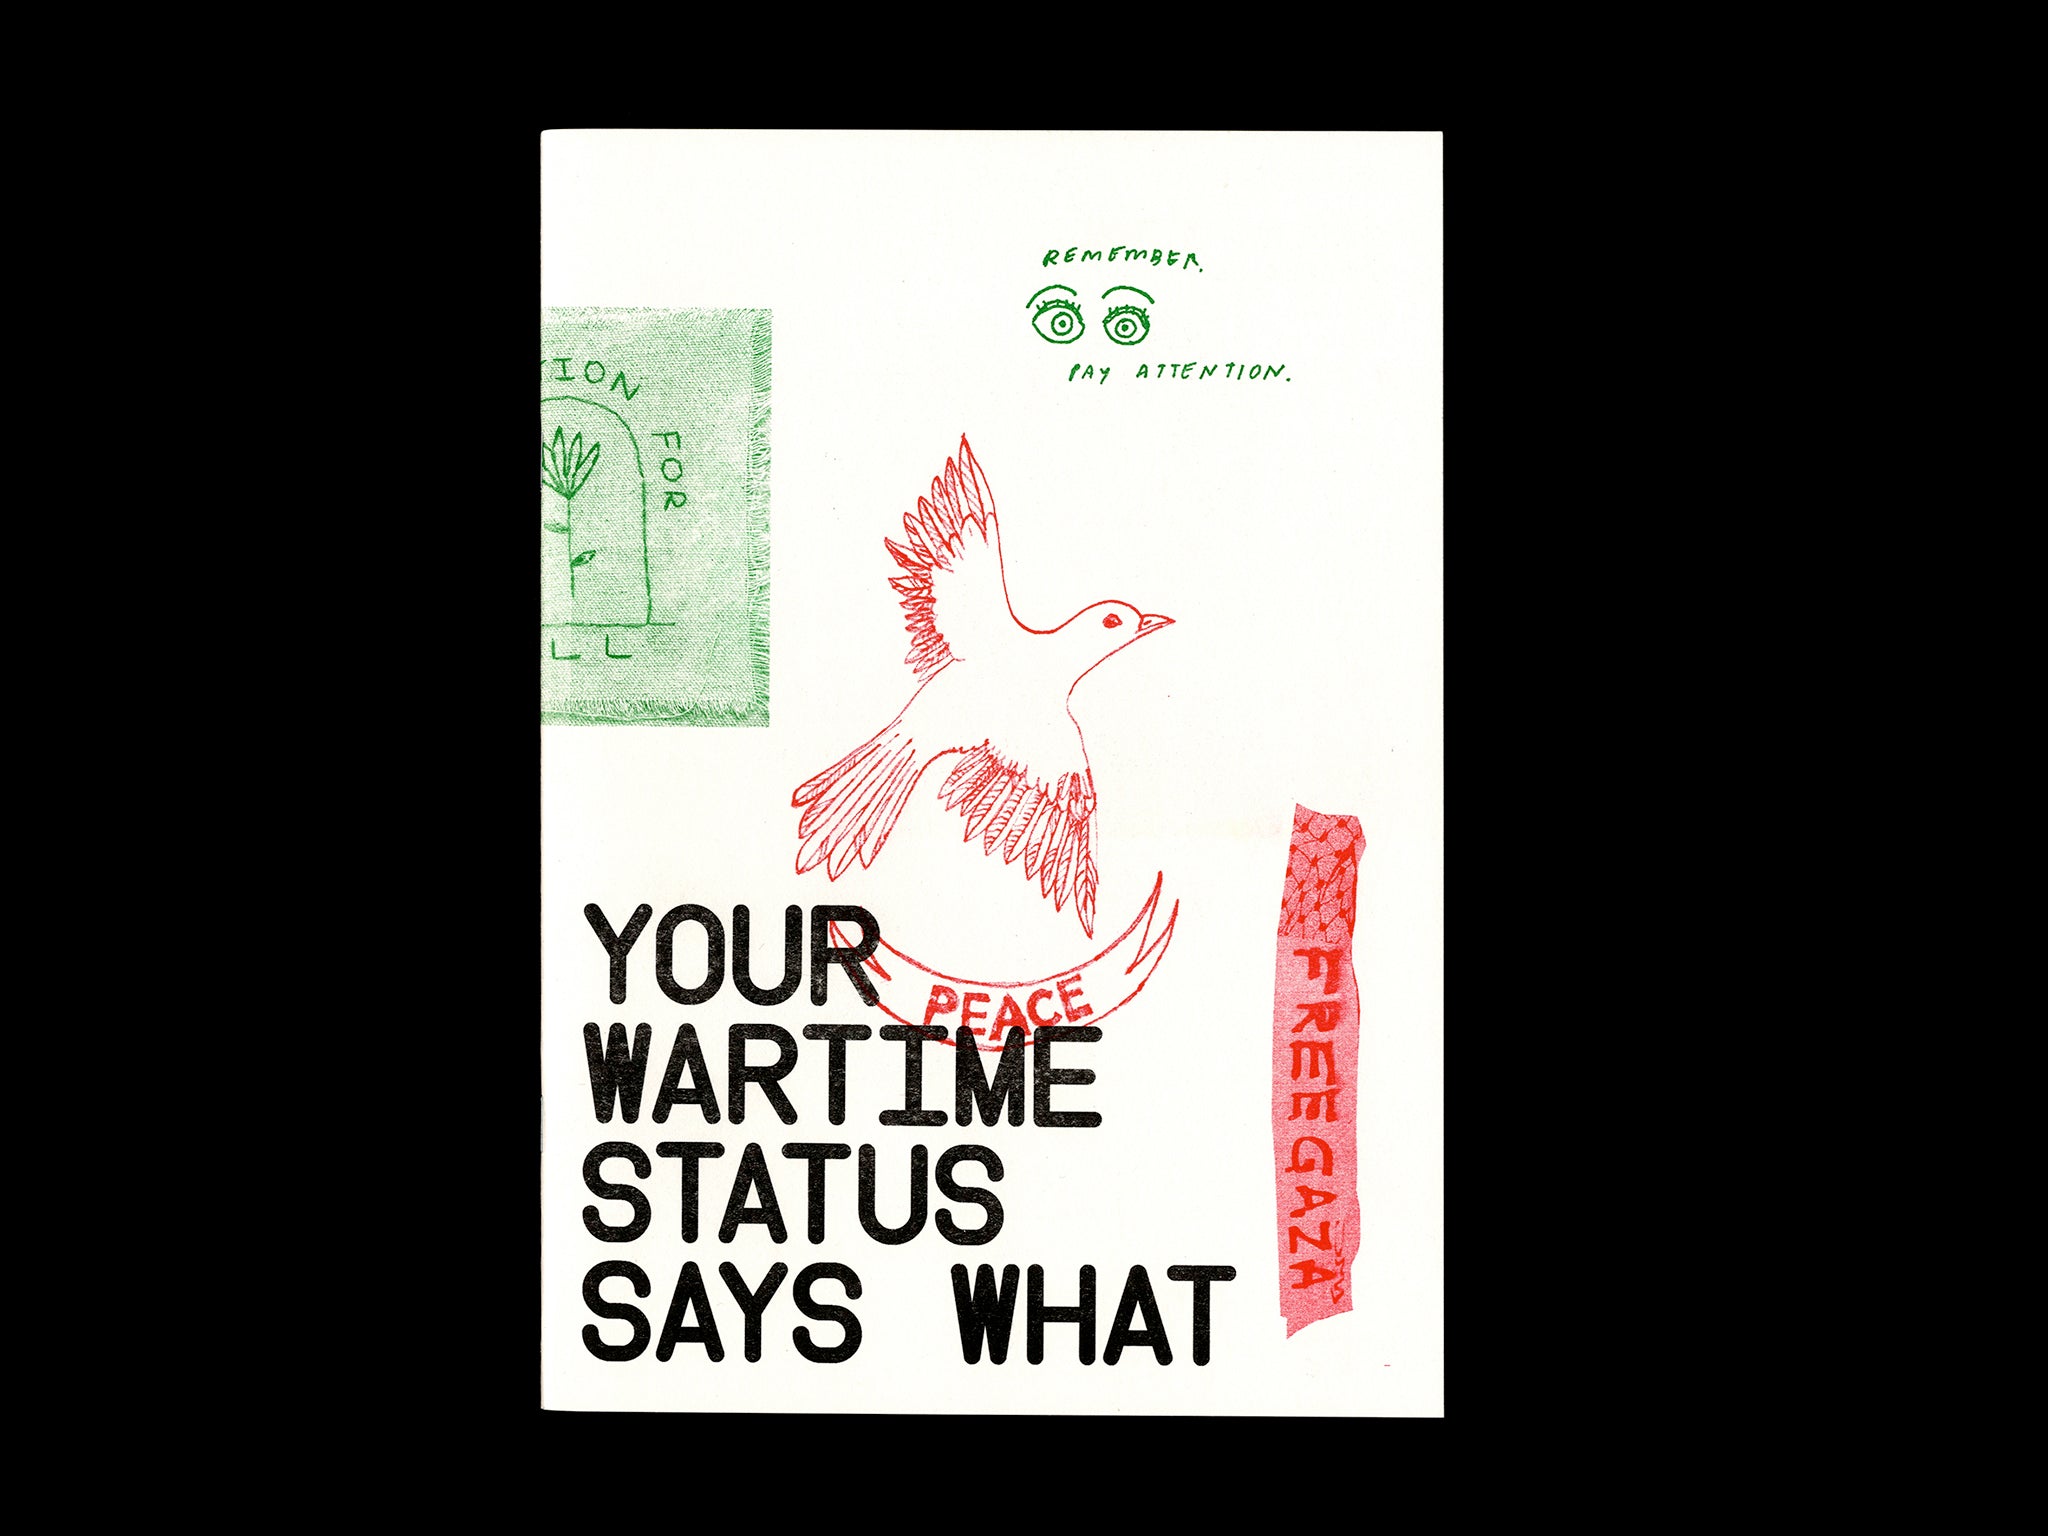 YOUR WARTIME STATUS SAYS WHAT by Various Artists